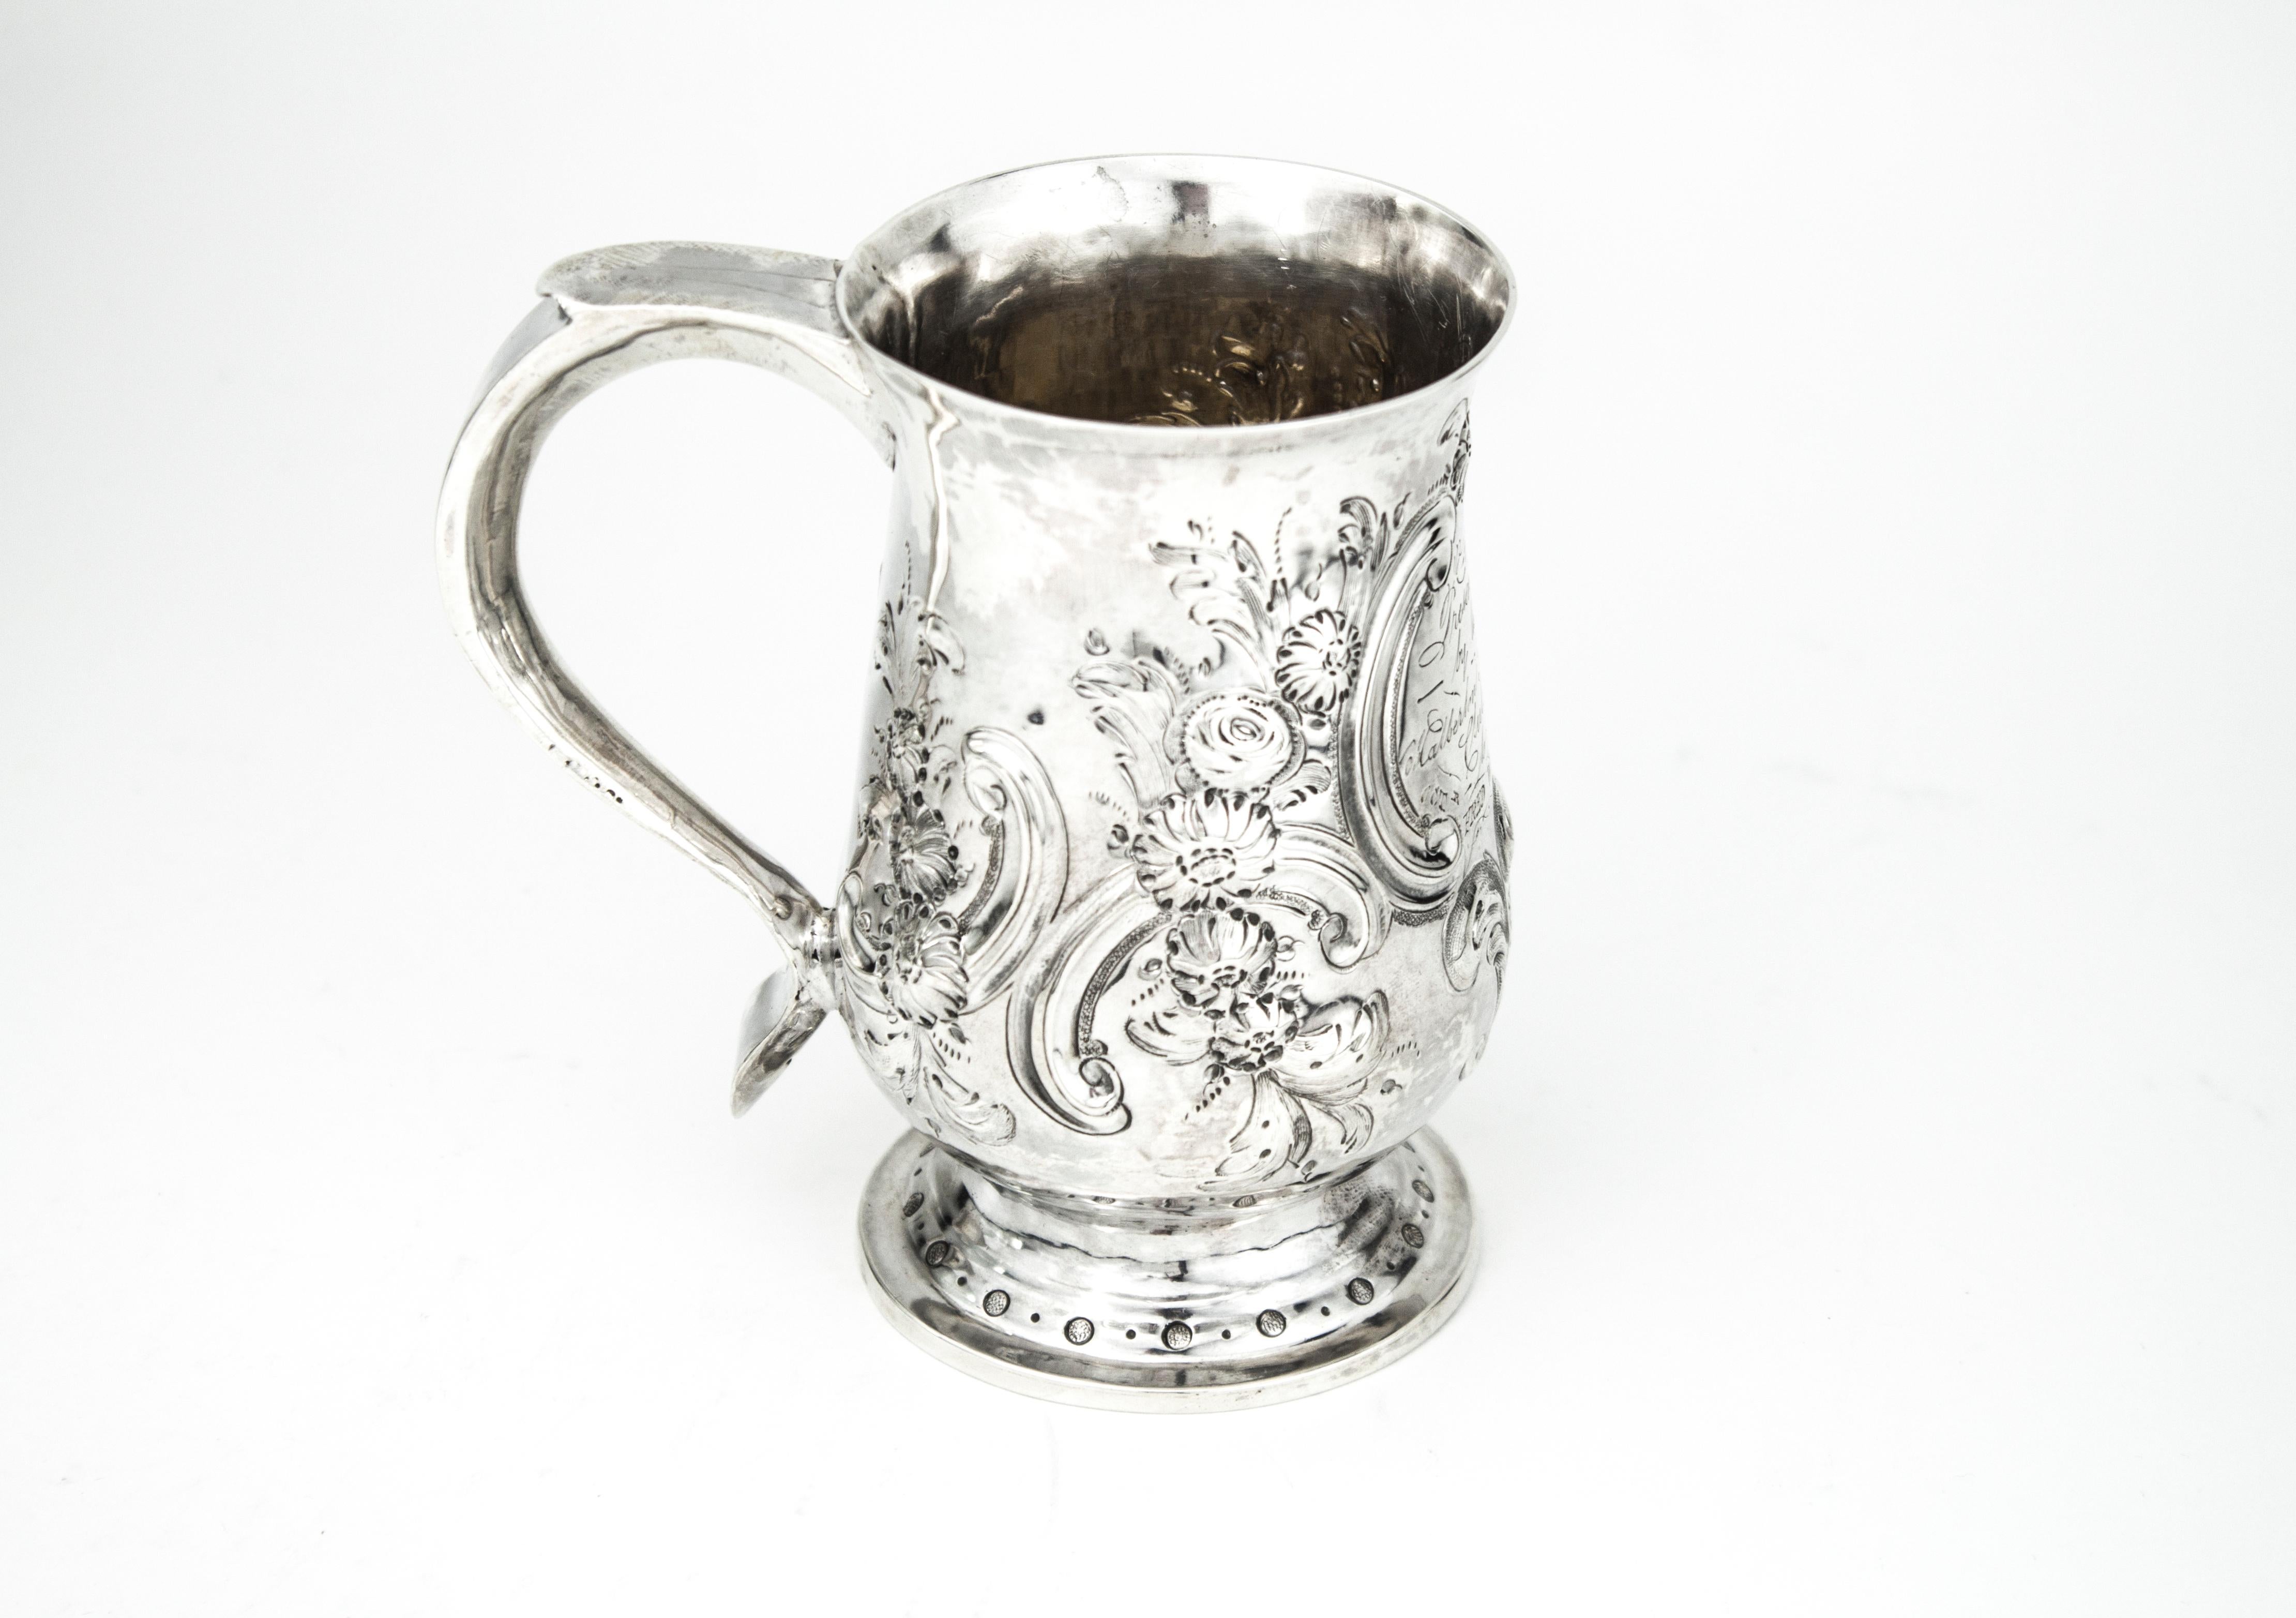 Antique George III sterling silver mug

Made in England, London, 1813
Maker: I.S (Possibly John Schofield)
Dimensions:
Size 10 x 7 x 11 cm
Weight: 145 grams

Has engraving 